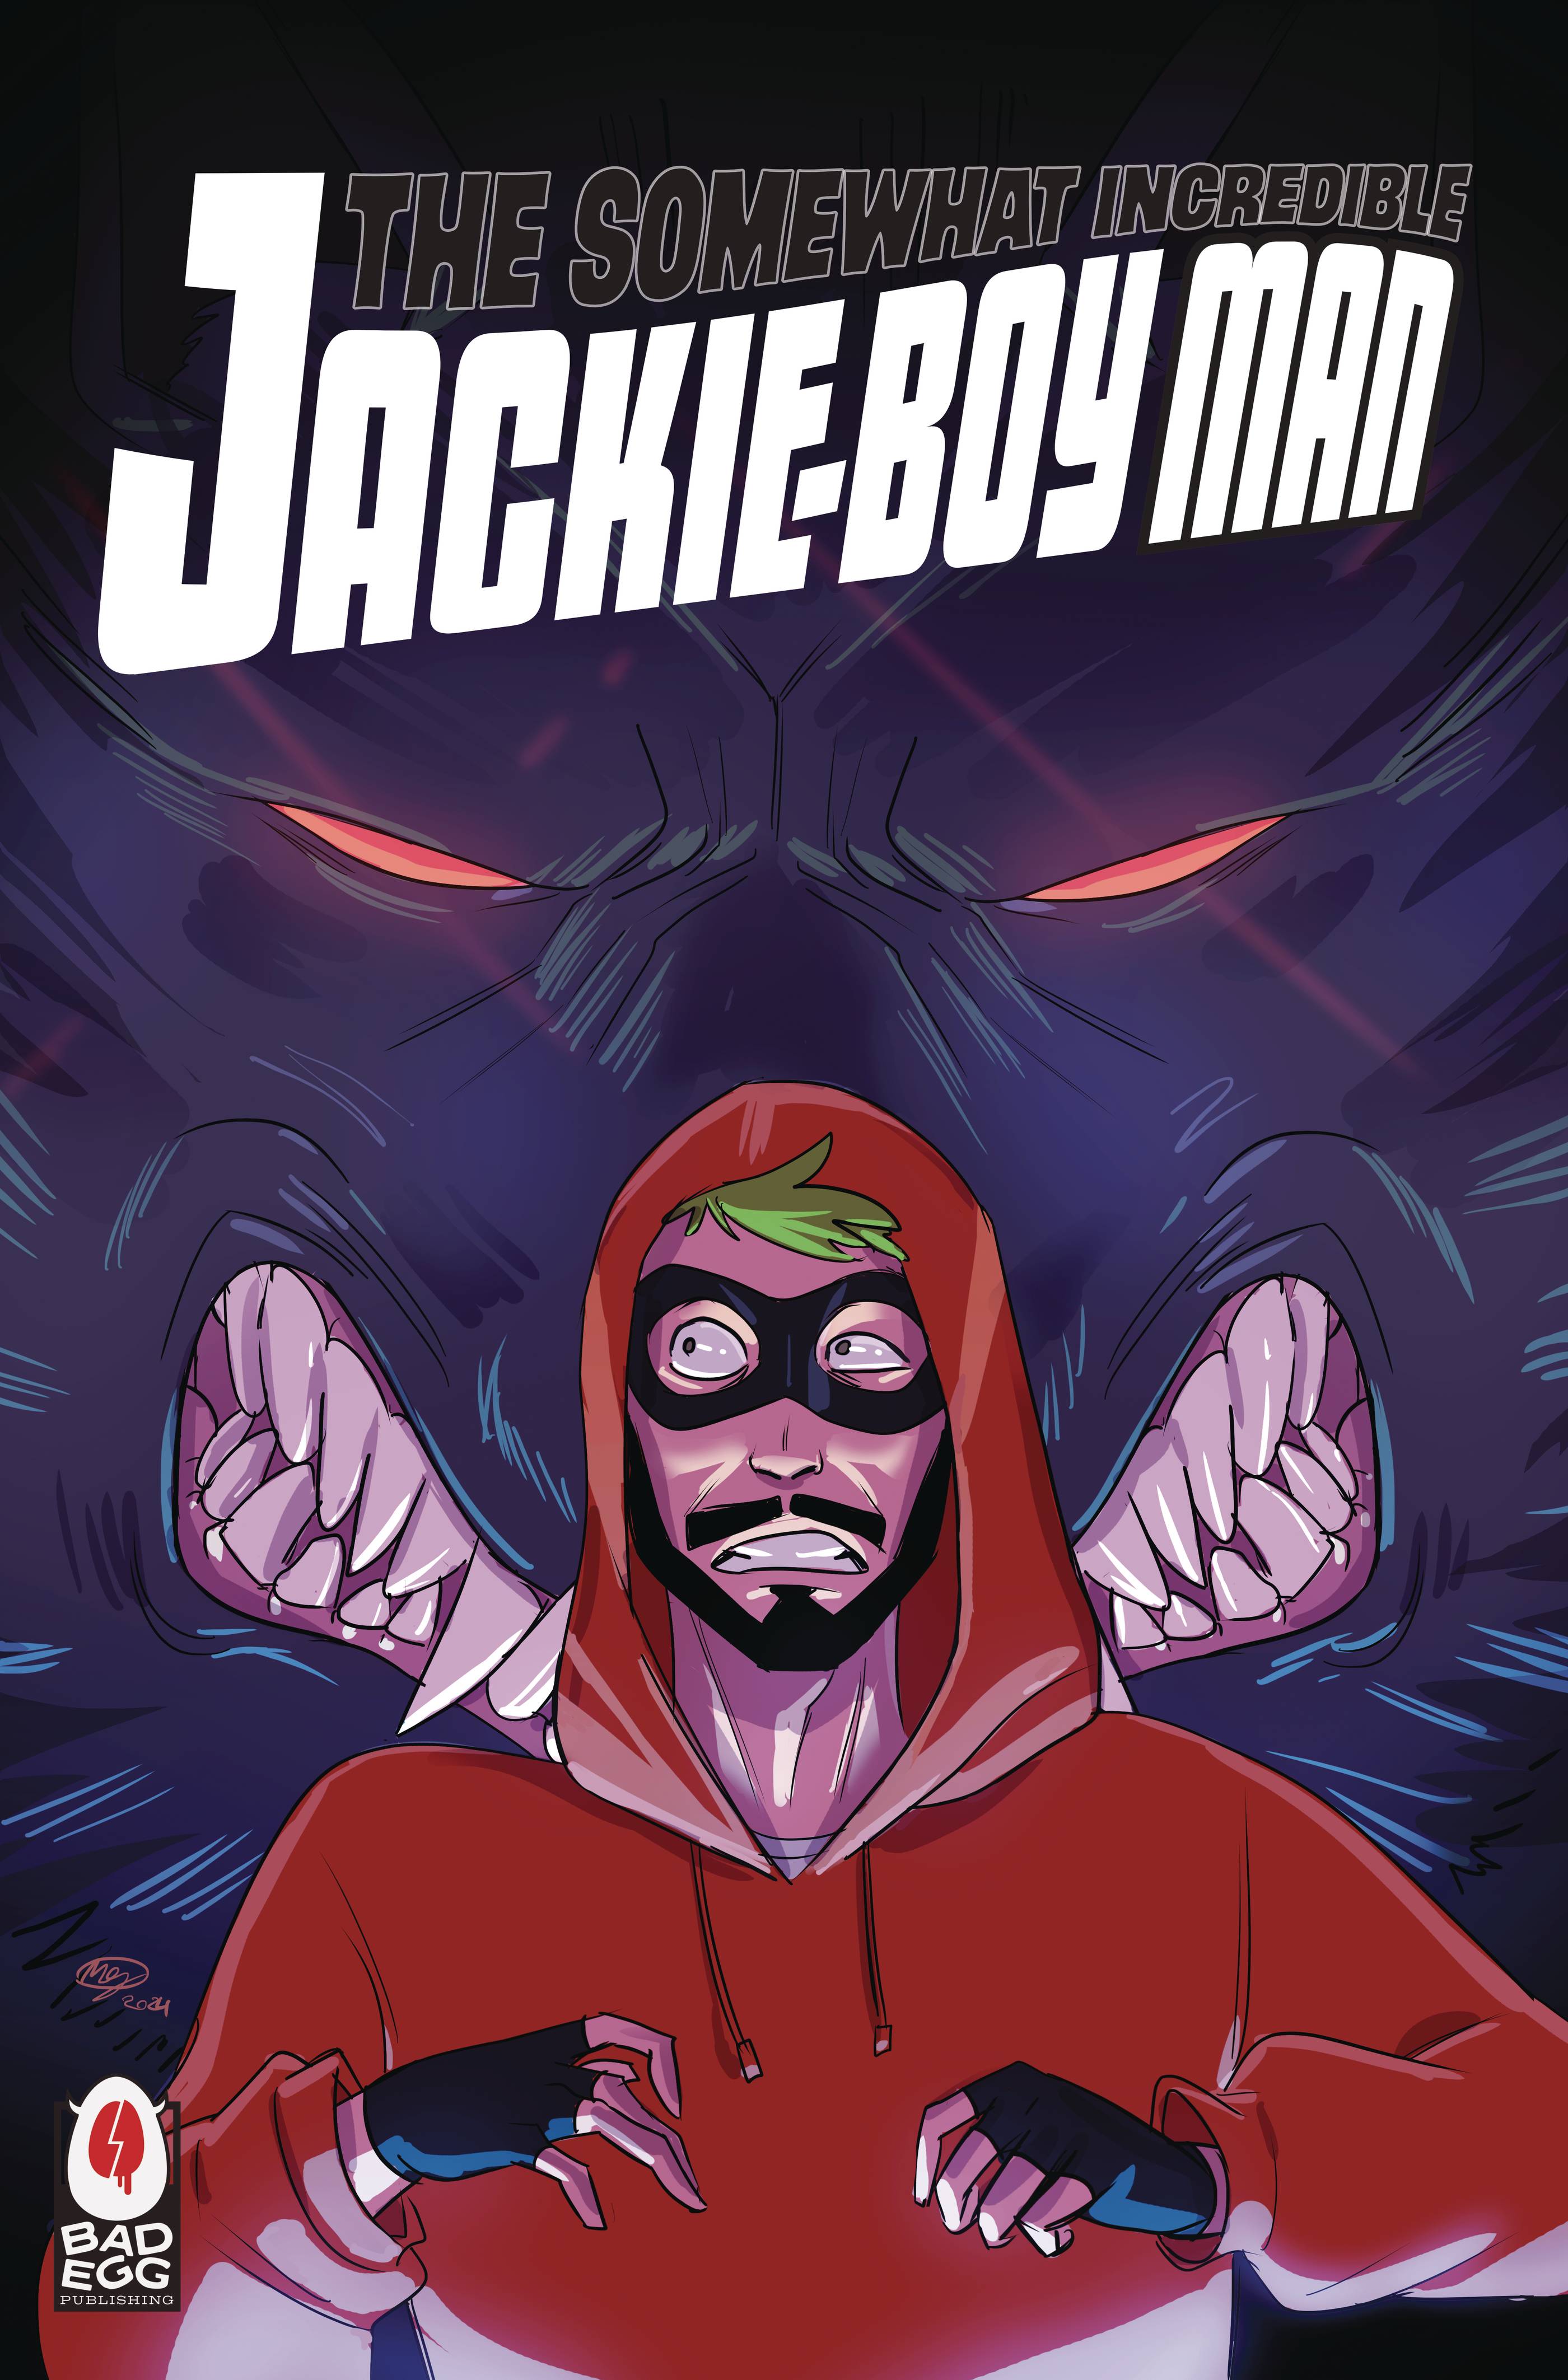 The Somewhat Incredible Jackie-Boy Man #2 (2024)